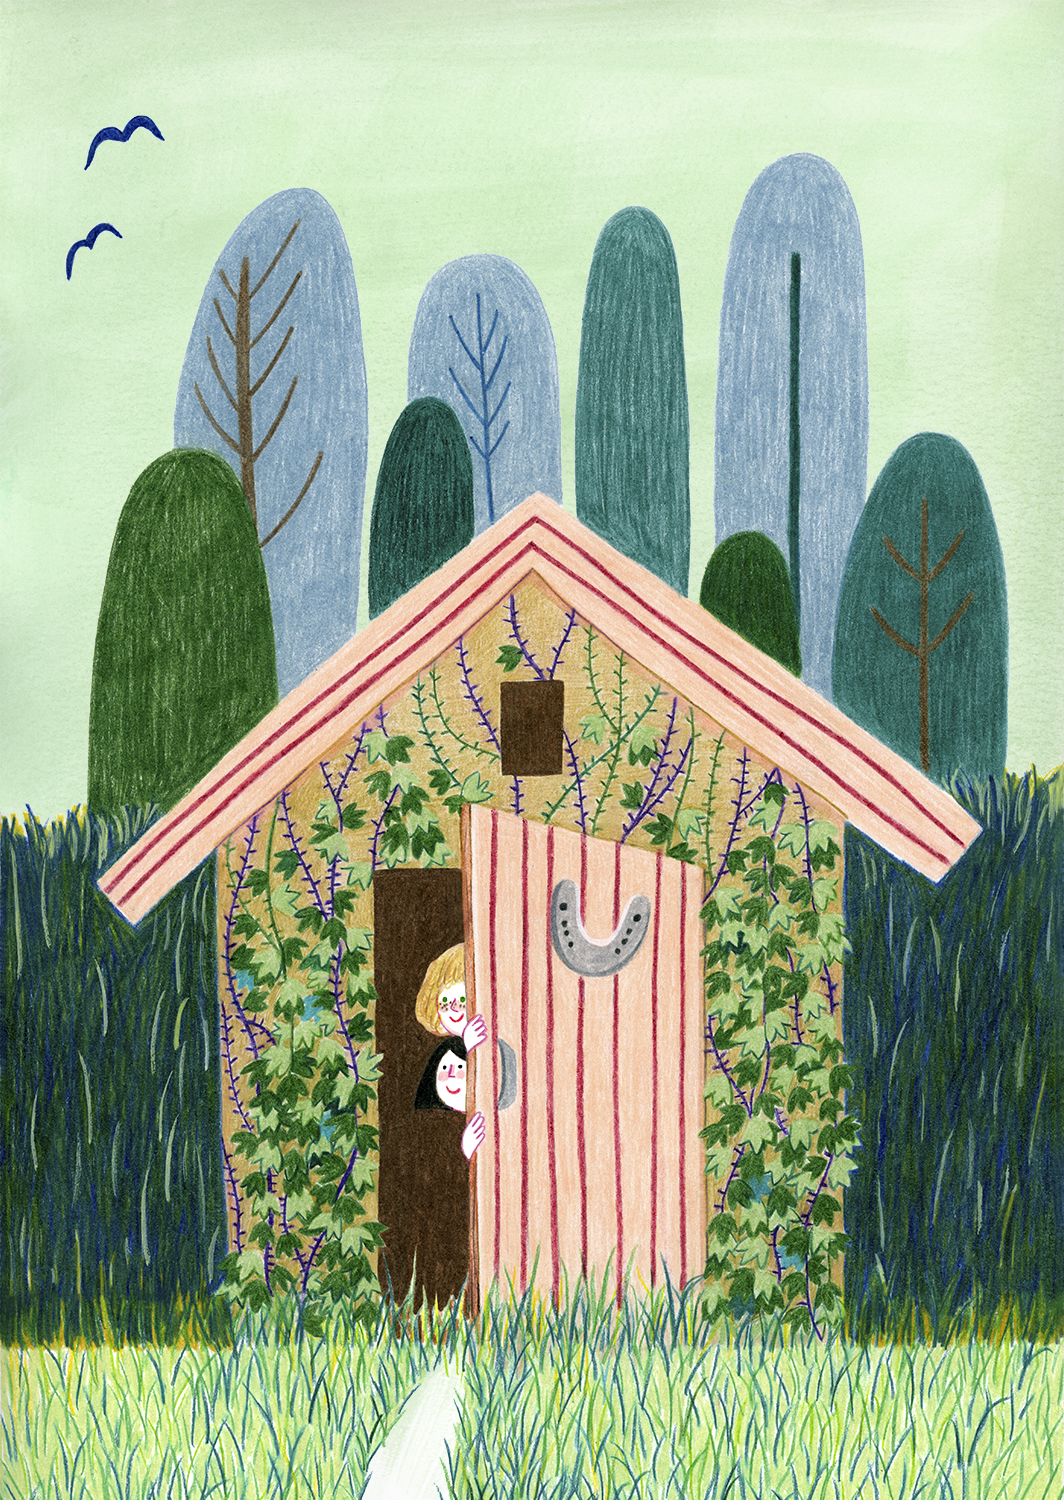 The Secret Hen House Theatre illustration by Yinfan Huang